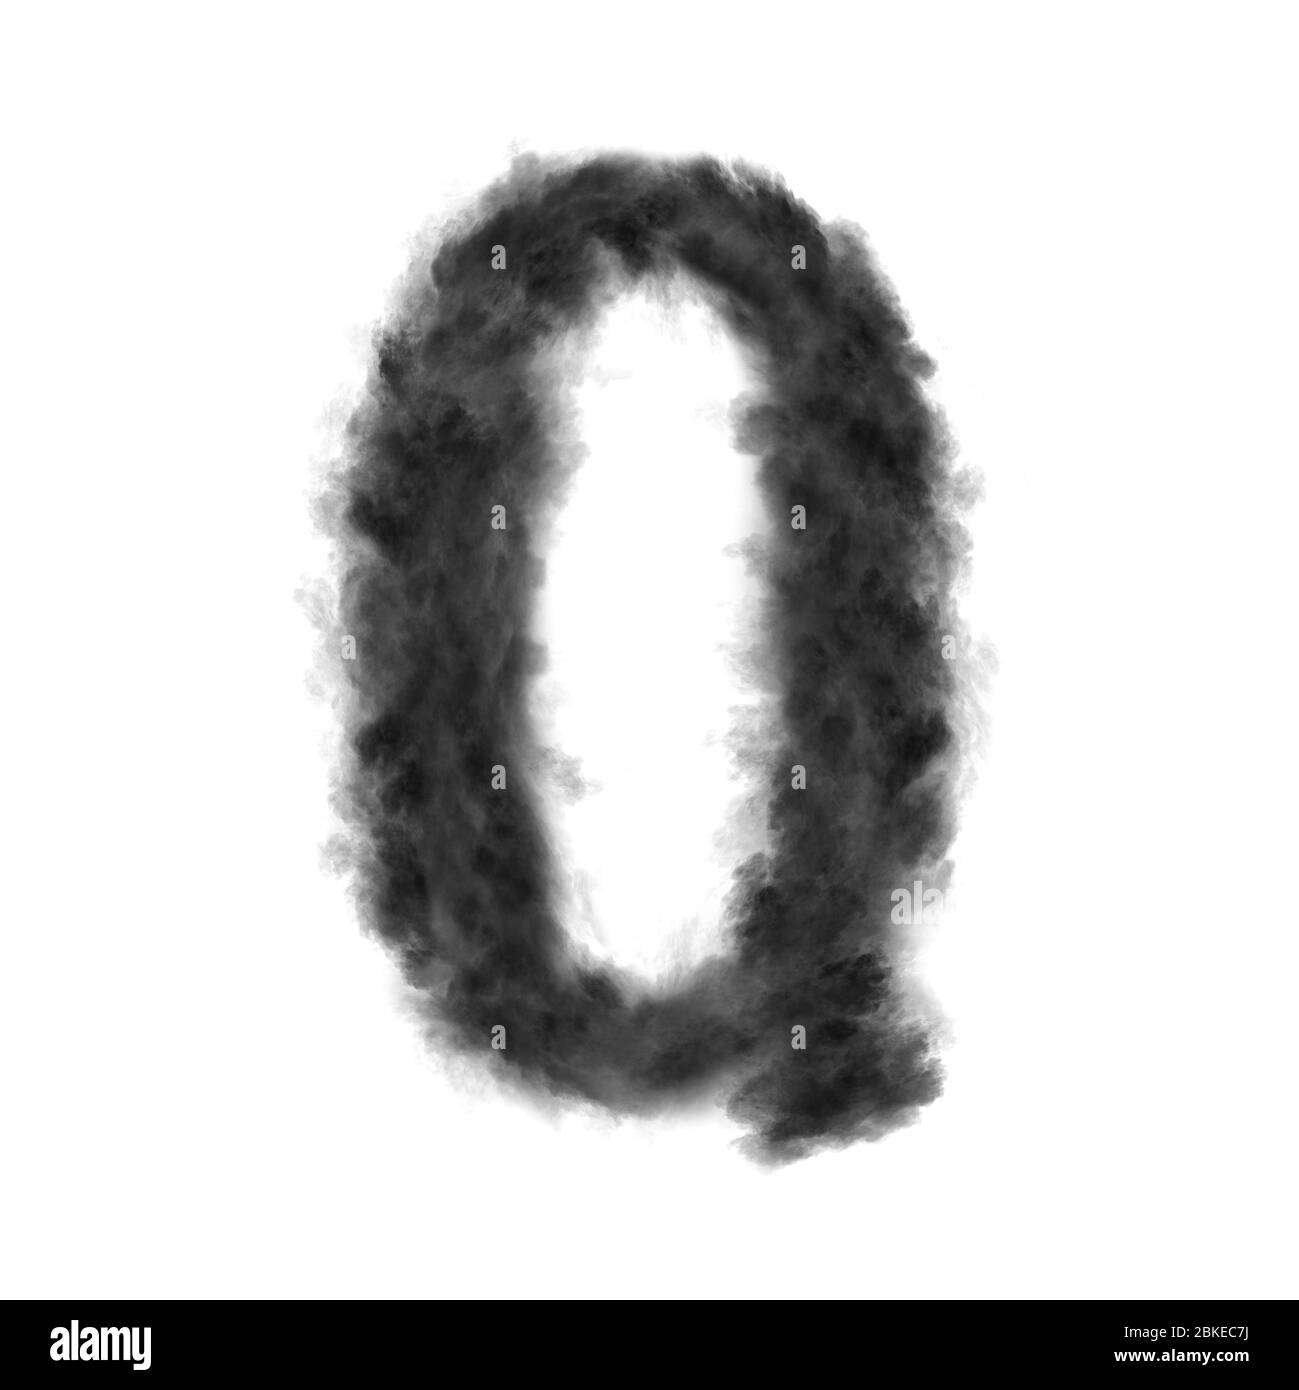 Letter Q made from black clouds on a white background. Stock Photo